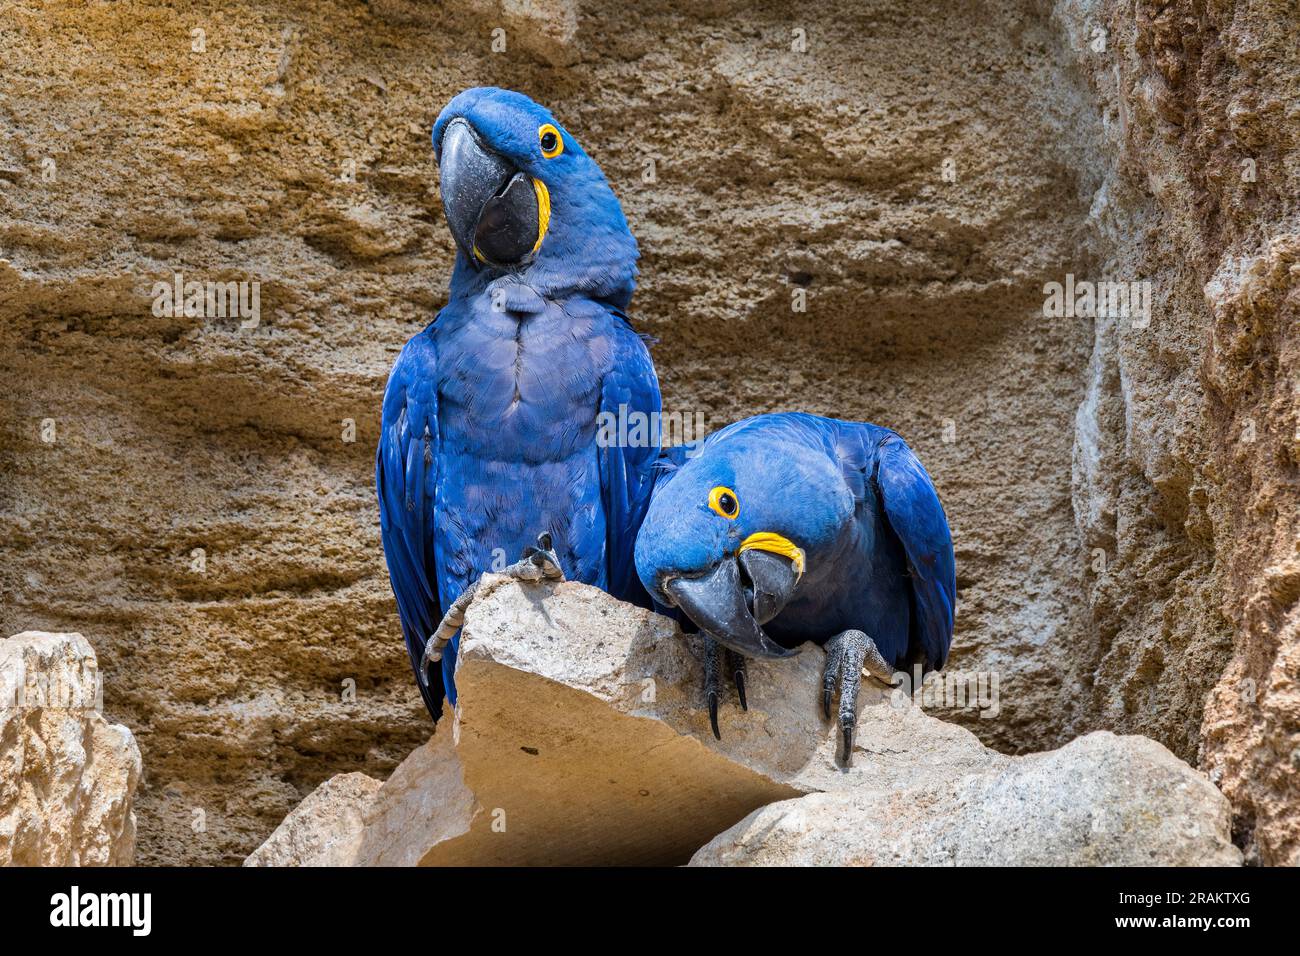 Hyacinth macaw / hyacinthine macaws (Anodorhynchus hyacinthinus) pair on rock ledge in cliff face, parrots native to central and eastern South America Stock Photo